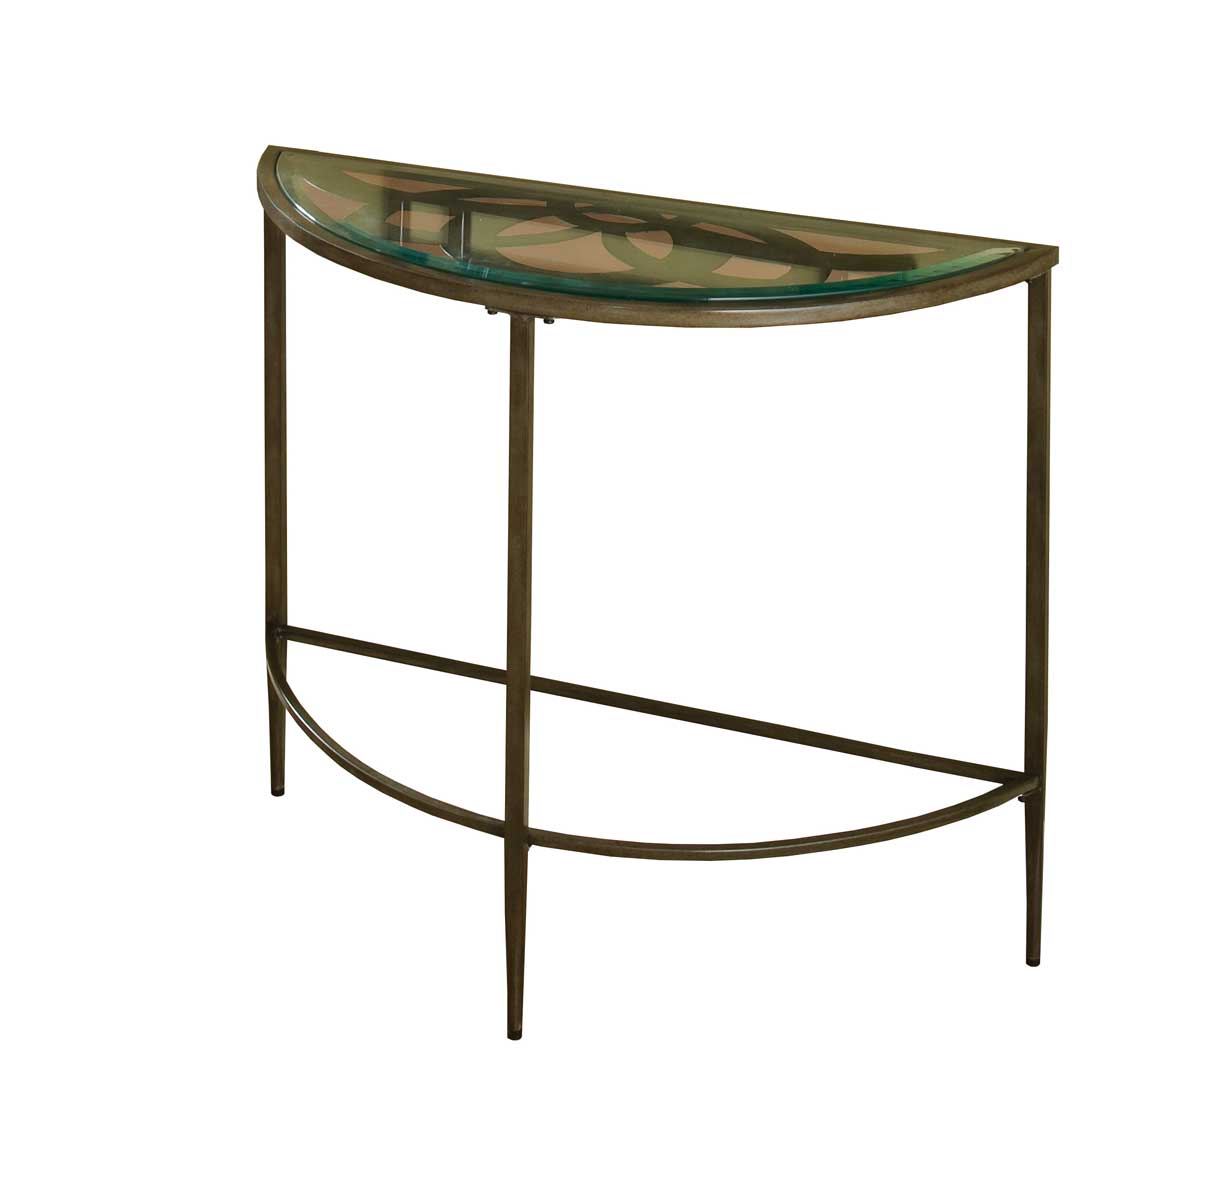 Hillsdale Marsala Console Table - Gray with Brown Rub